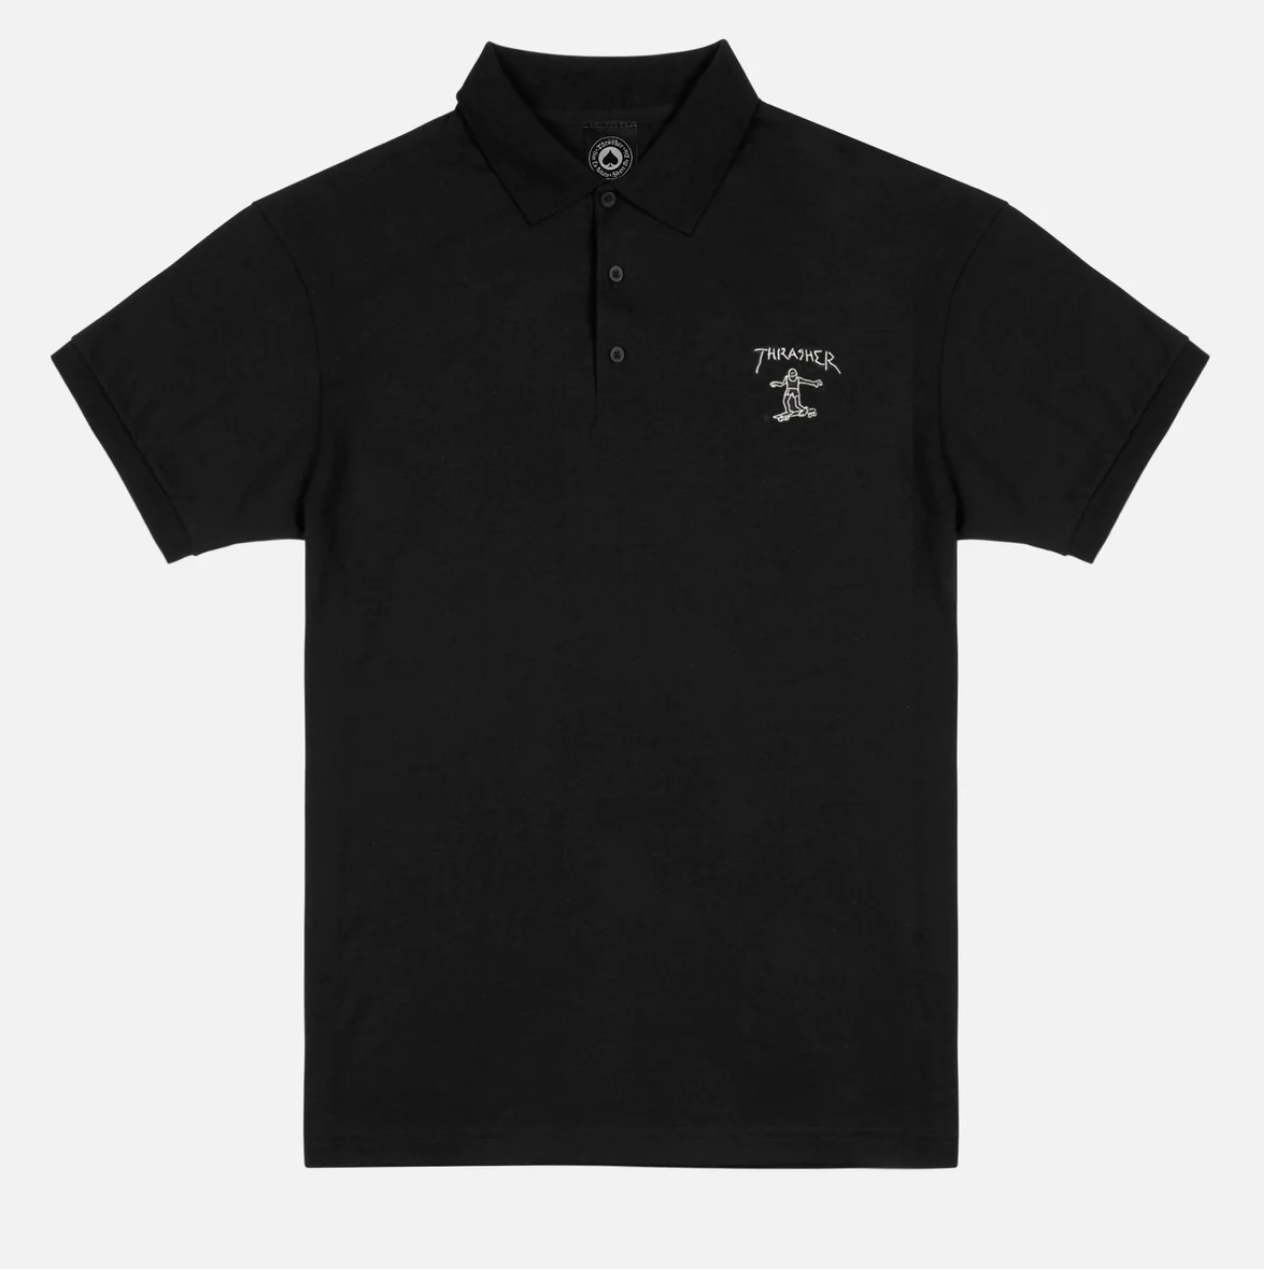 Standard fit short sleeve polo shirt woven from USA cotton. Featuring a sewn-in label and finished with embroidered artwork at left-chest. 50% Cotton / 50% Polyester.